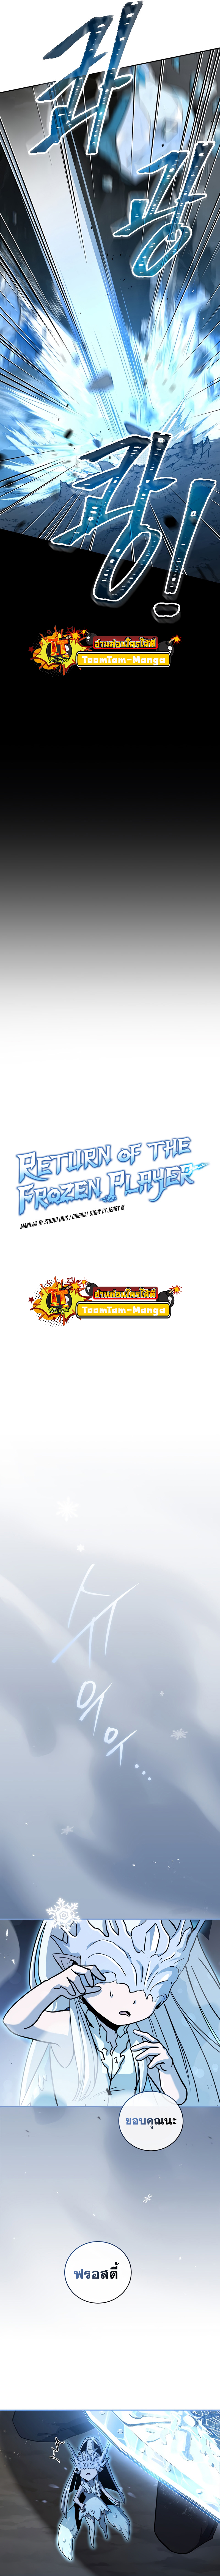 Return of the frozen player 29 10 650002